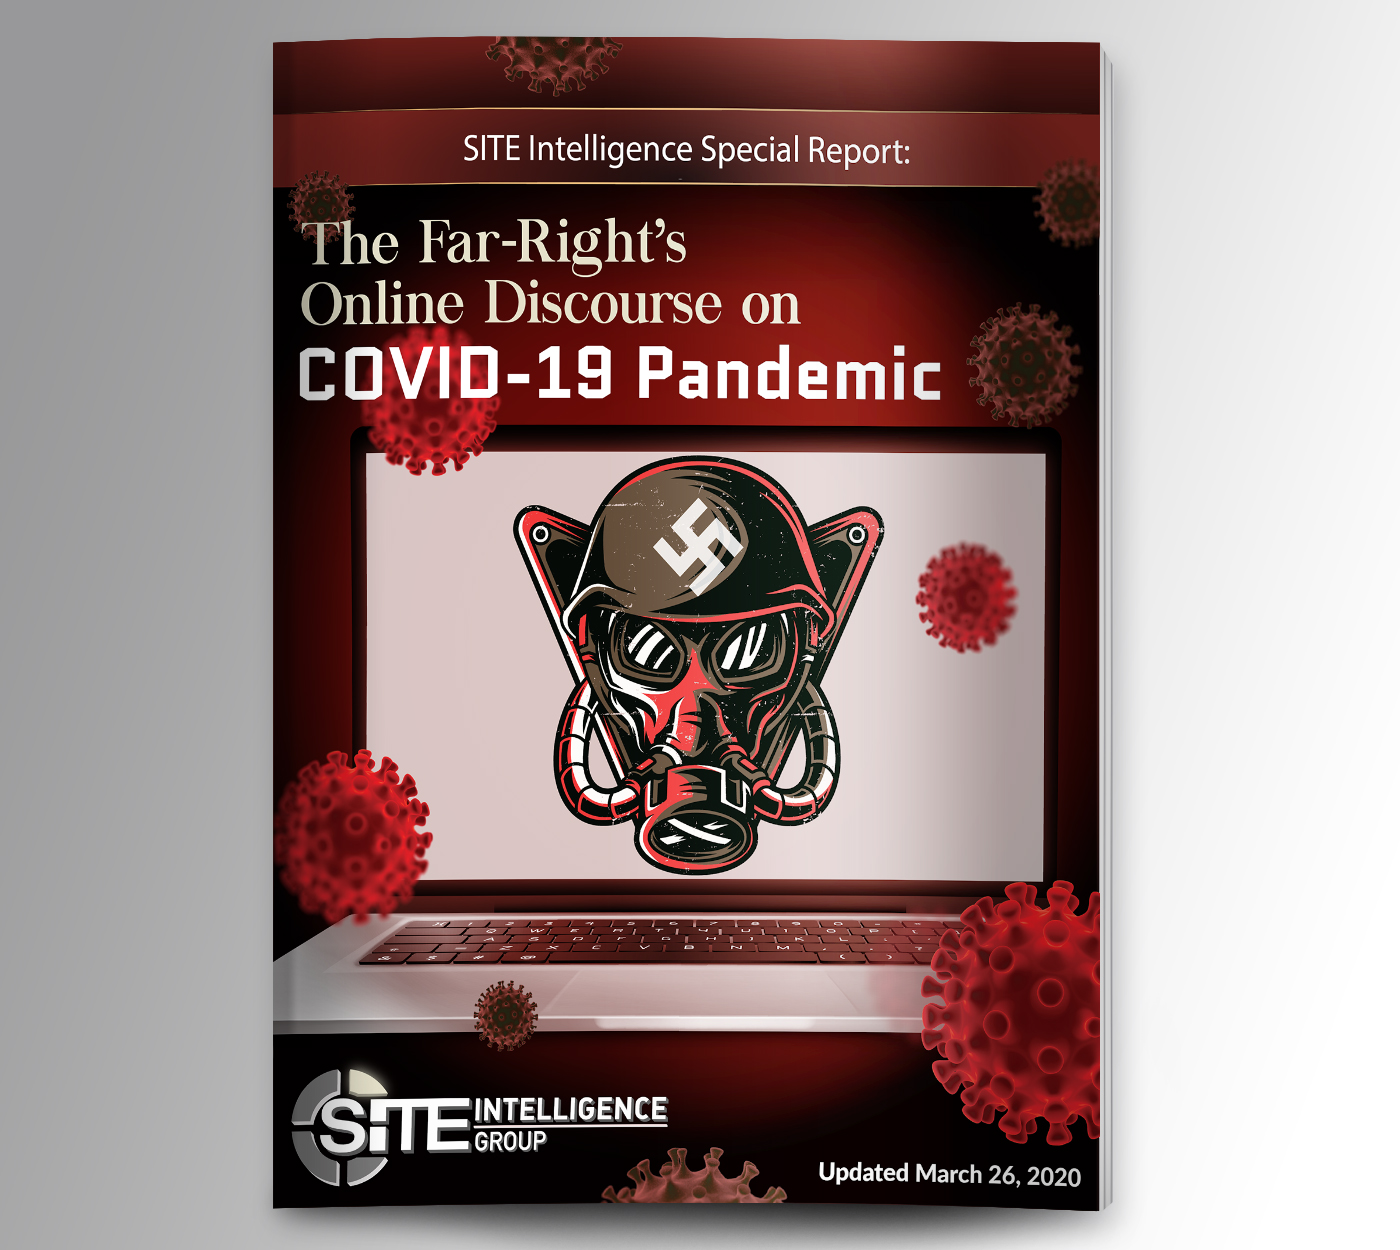 The Far-Right's Online Discourse on COVID-19 Pandemic